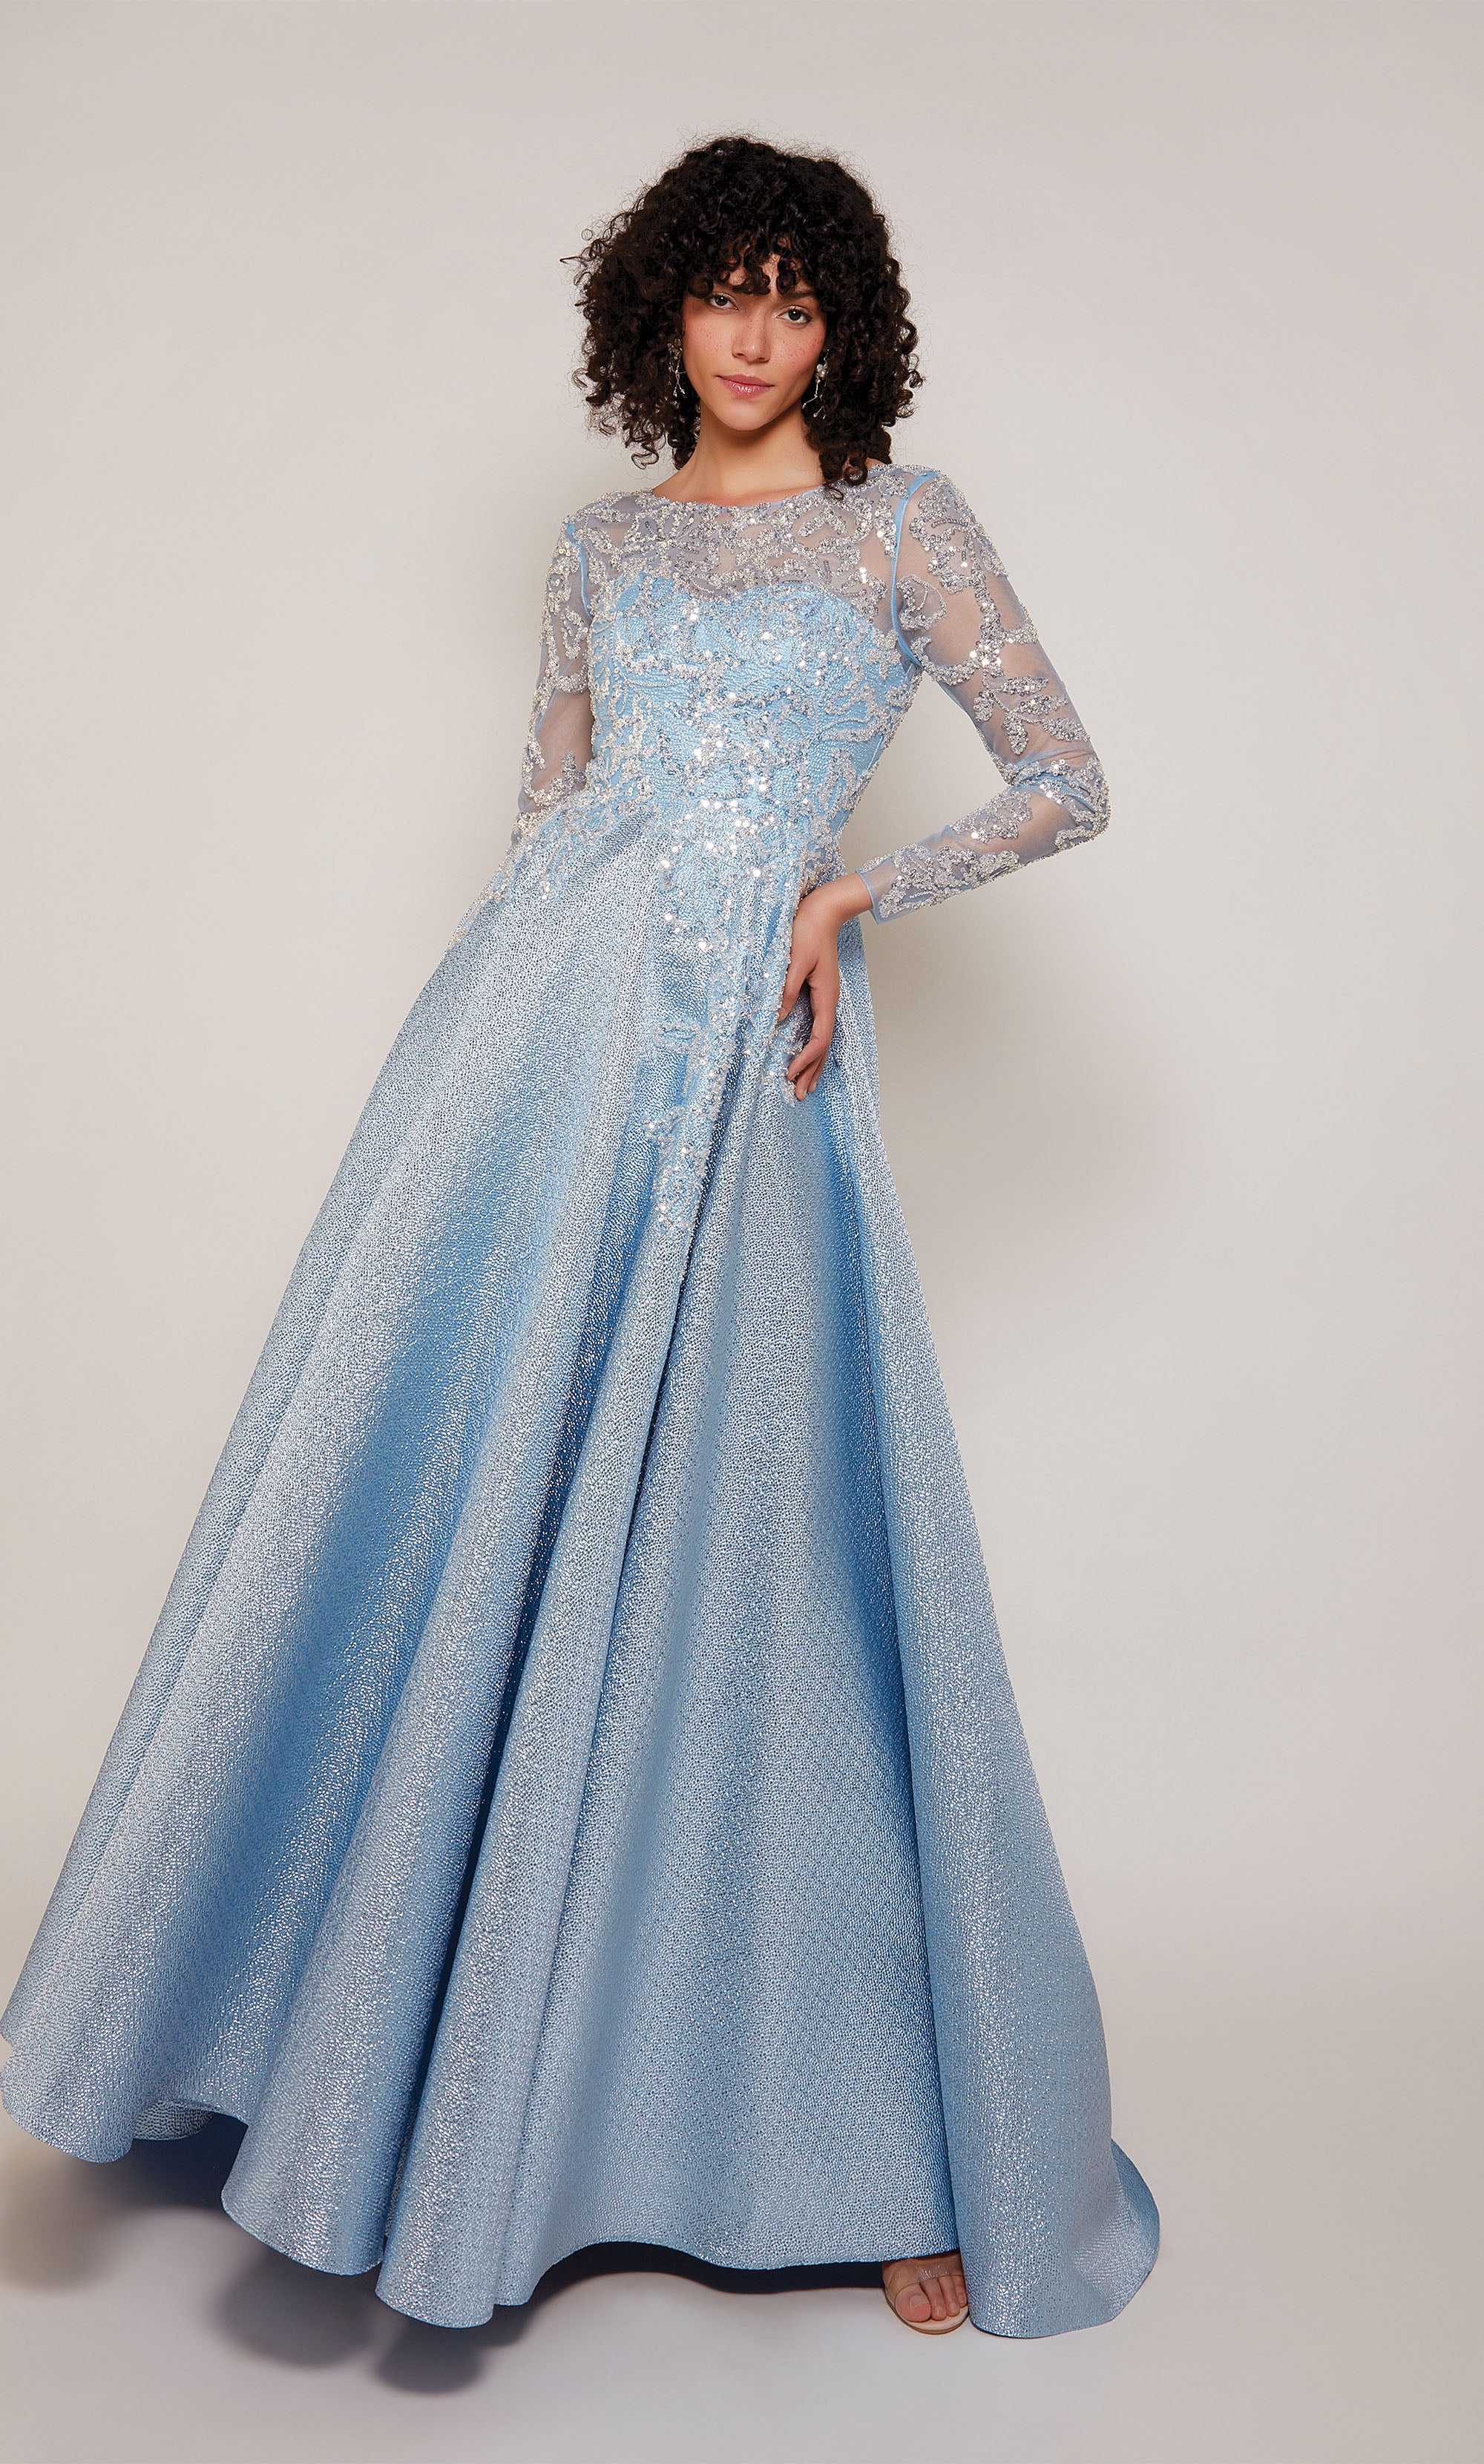 A french blue A-line mother of the bride gown with long sleeves and an illusion semi-sweetheart neckline. The bodice of the dress has a beautiful embellished tulle overlay.